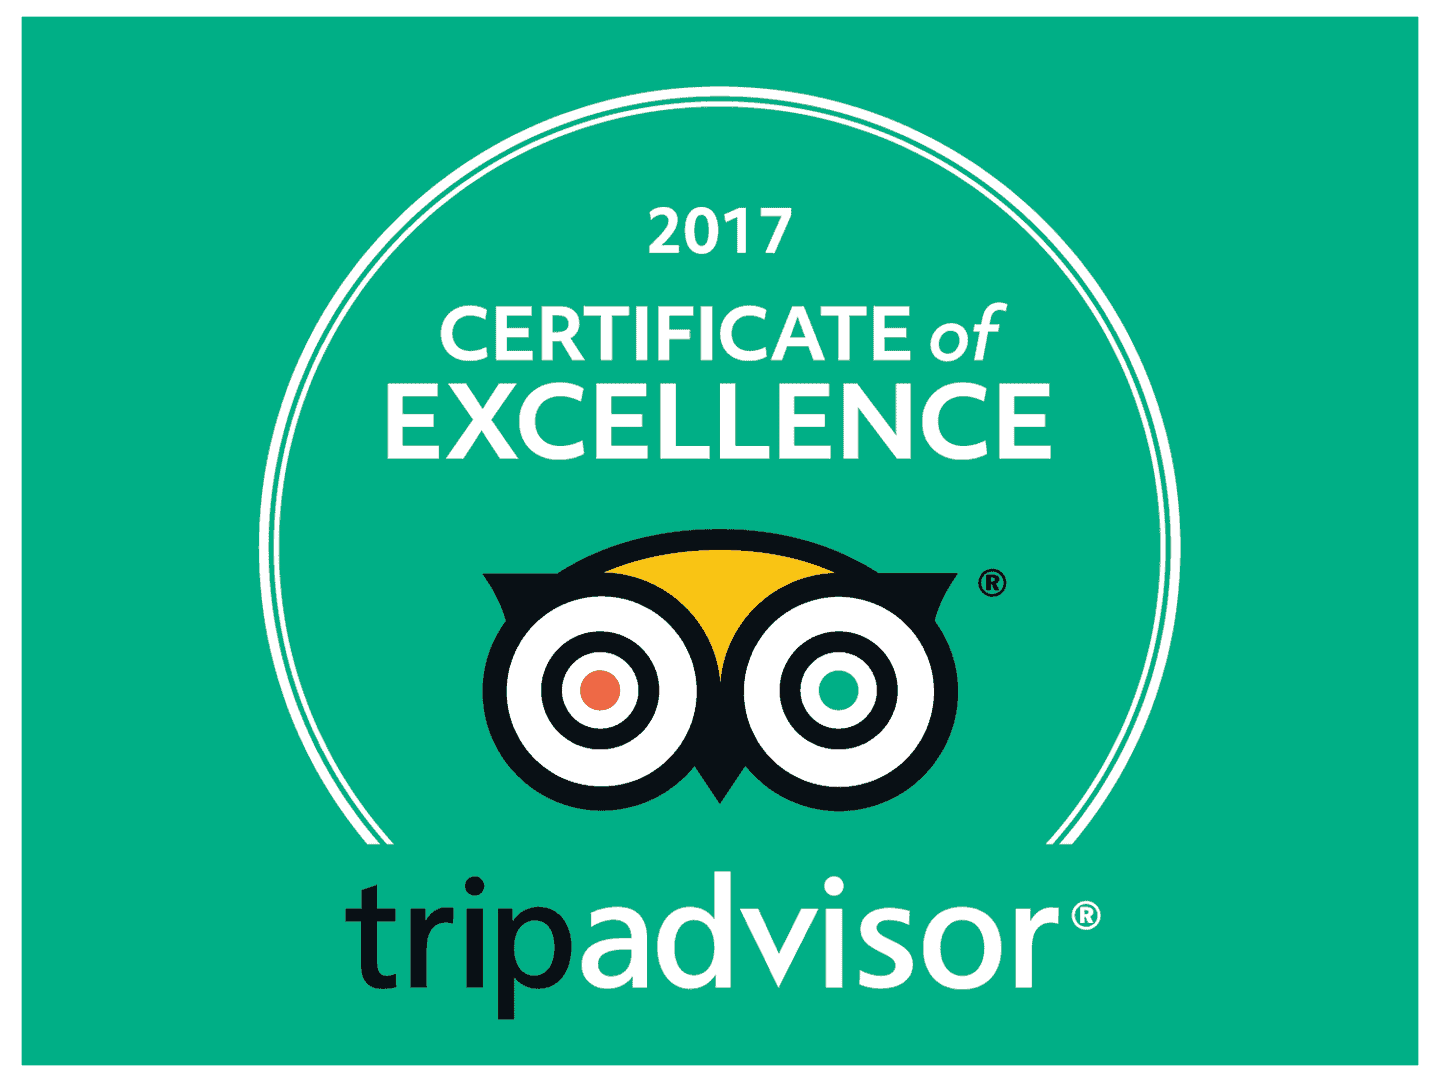 Certificate of excellence 2017